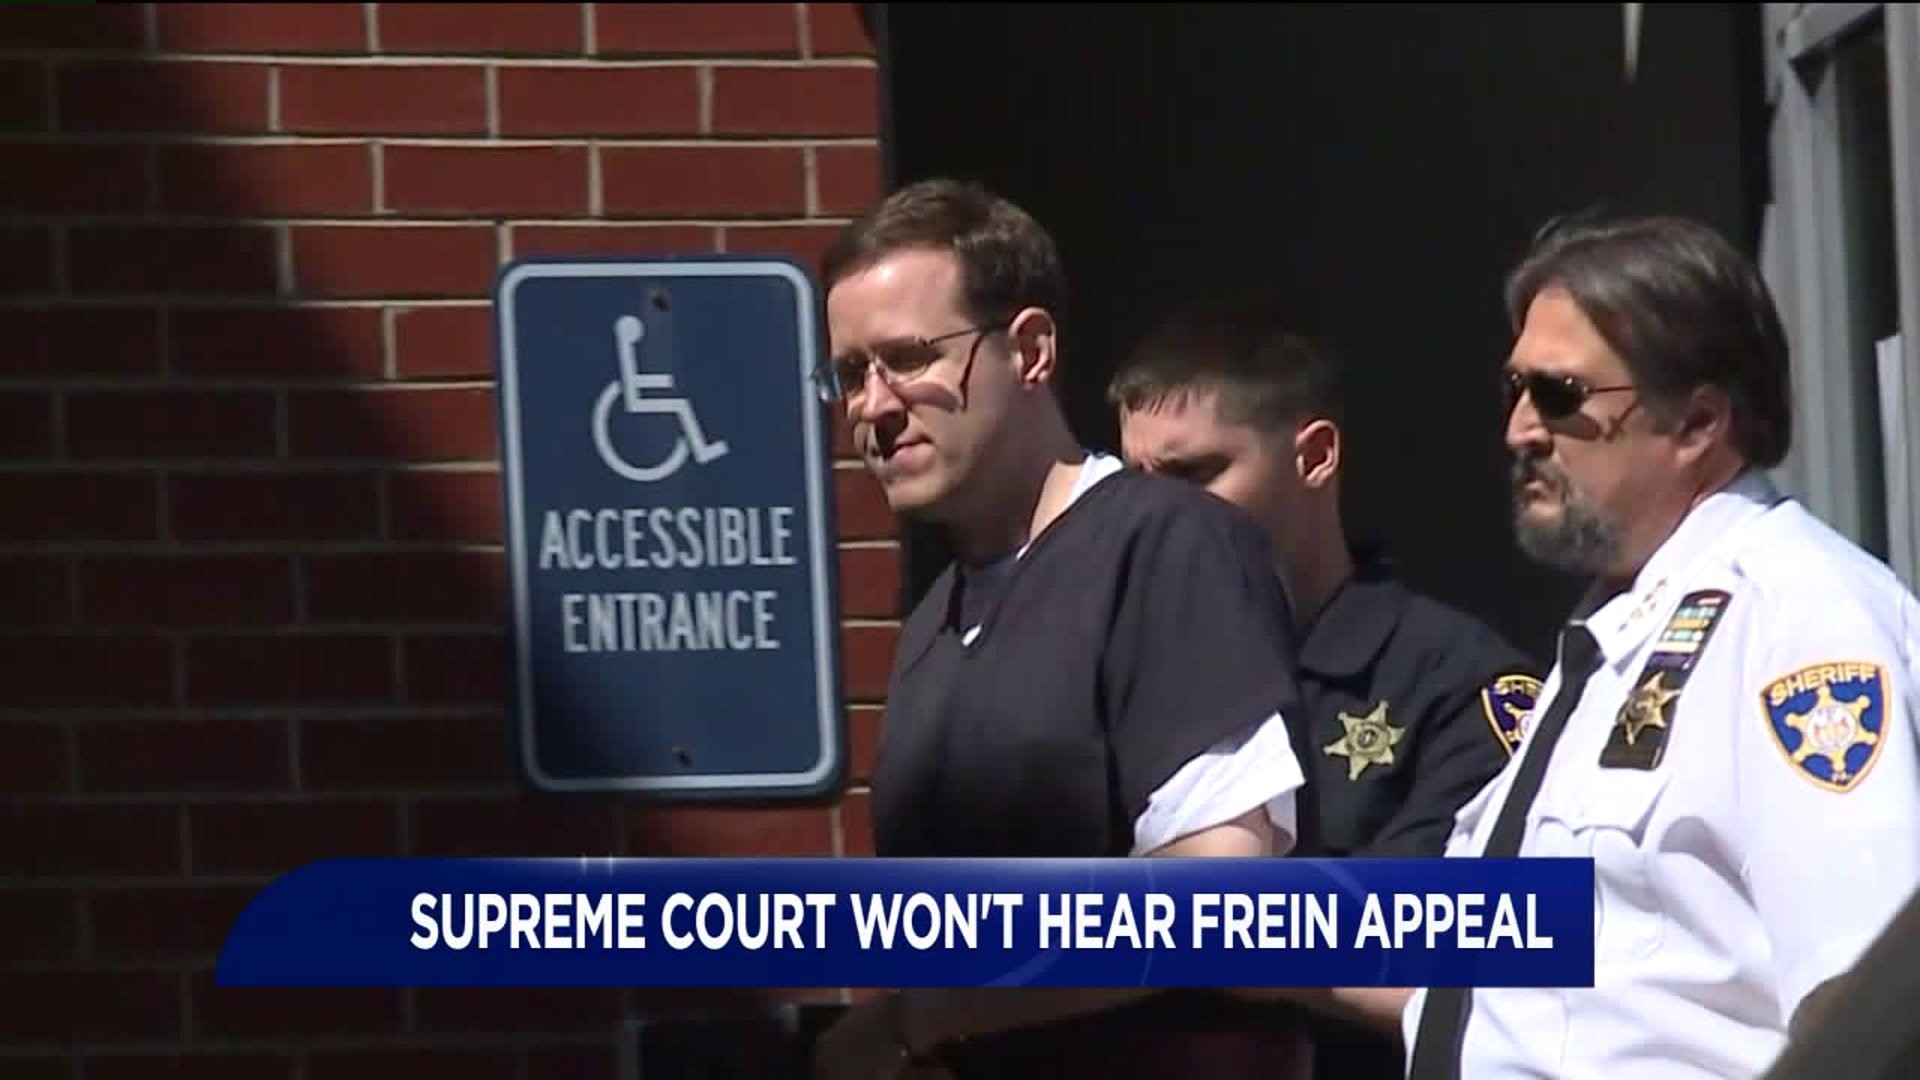 Eric Frein Appeal Denied by U.S. Supreme Court